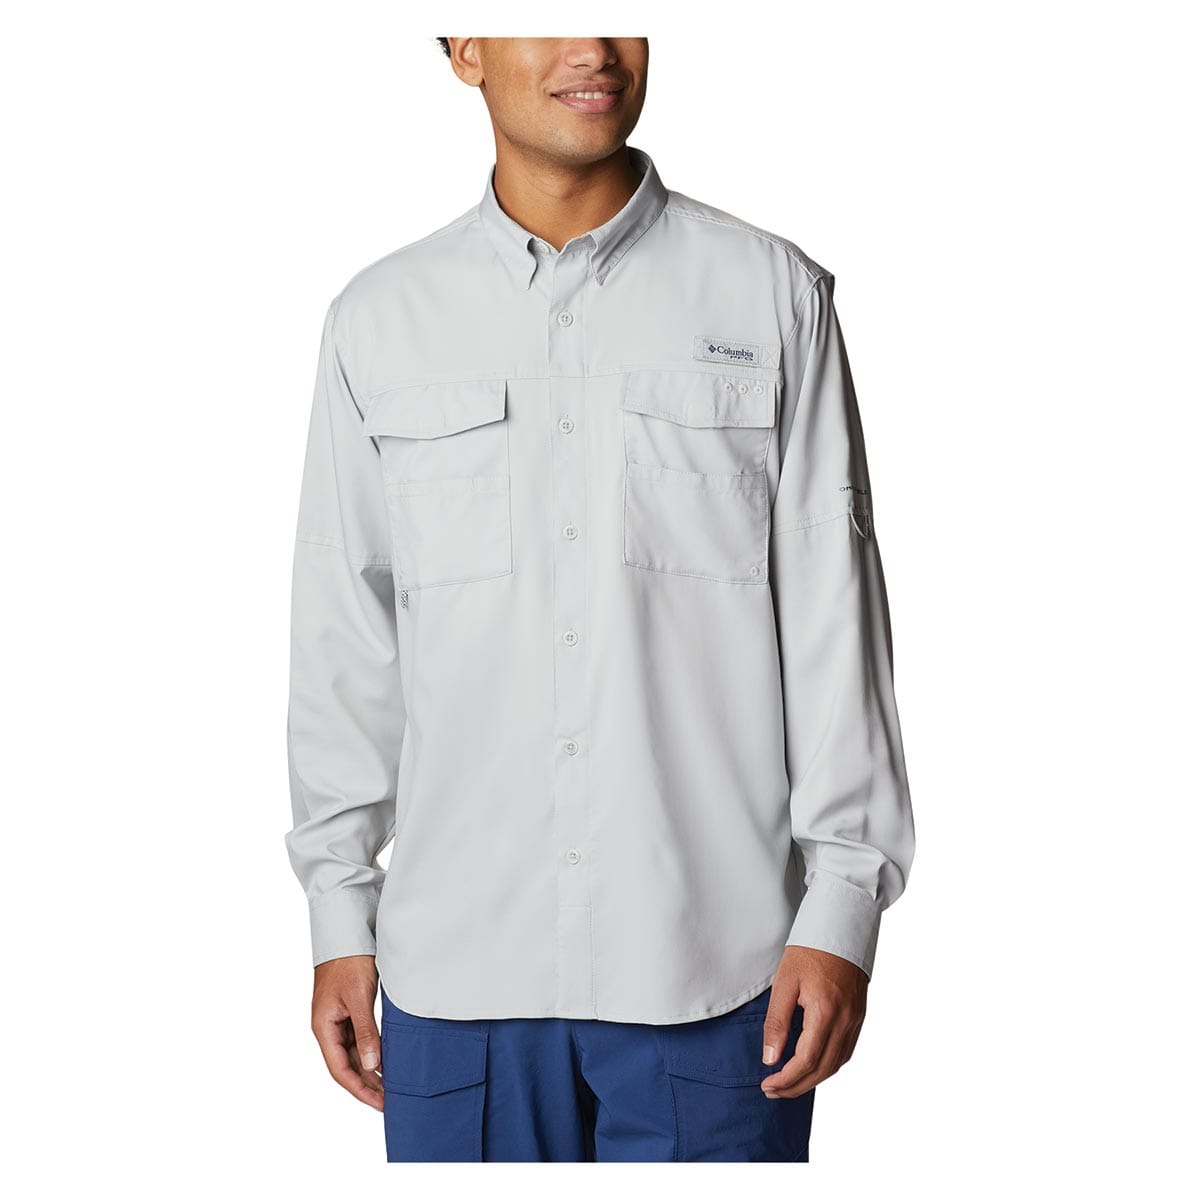 Columbia Blood and Guts IV Woven Long Sleeve Shirt